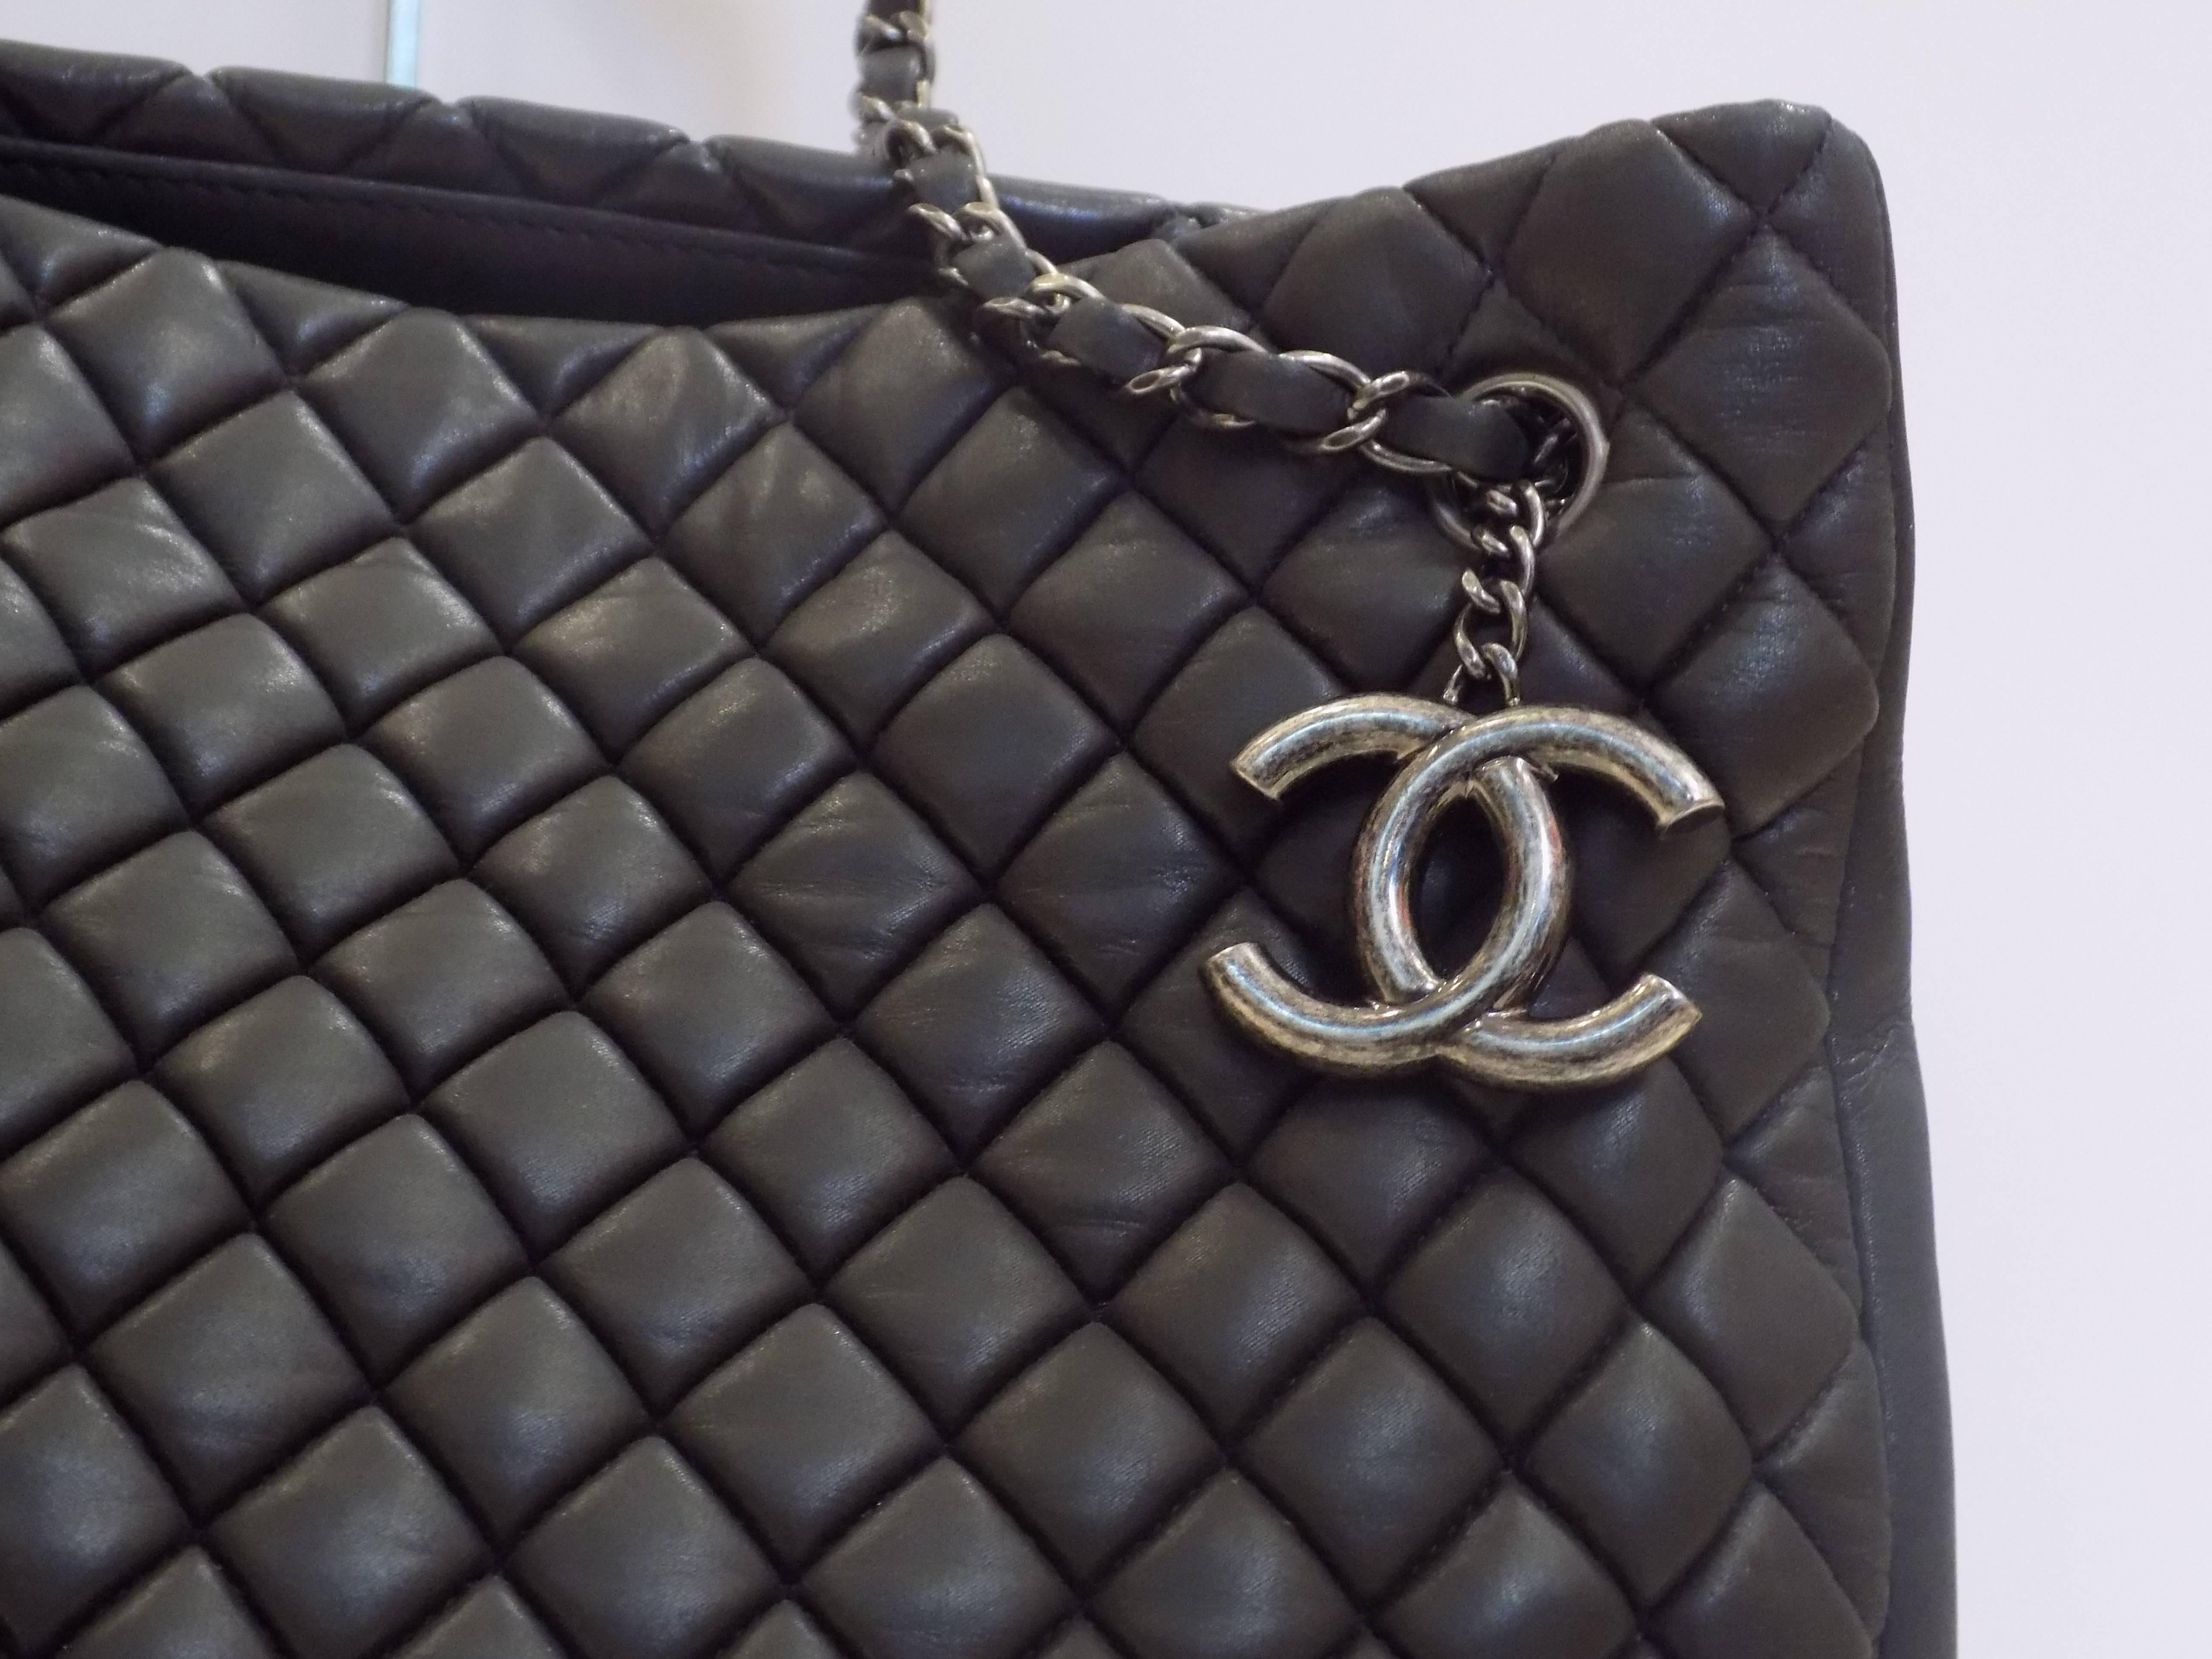 This is an authentic CHANEL Iridescent Caviar Zip Shopping Tote in Dark Silver This stunning shoulder bag is crafted of luxurious diamond quilted caviar leather with an iridescent finish that beautifully captures the light. The bag features dark